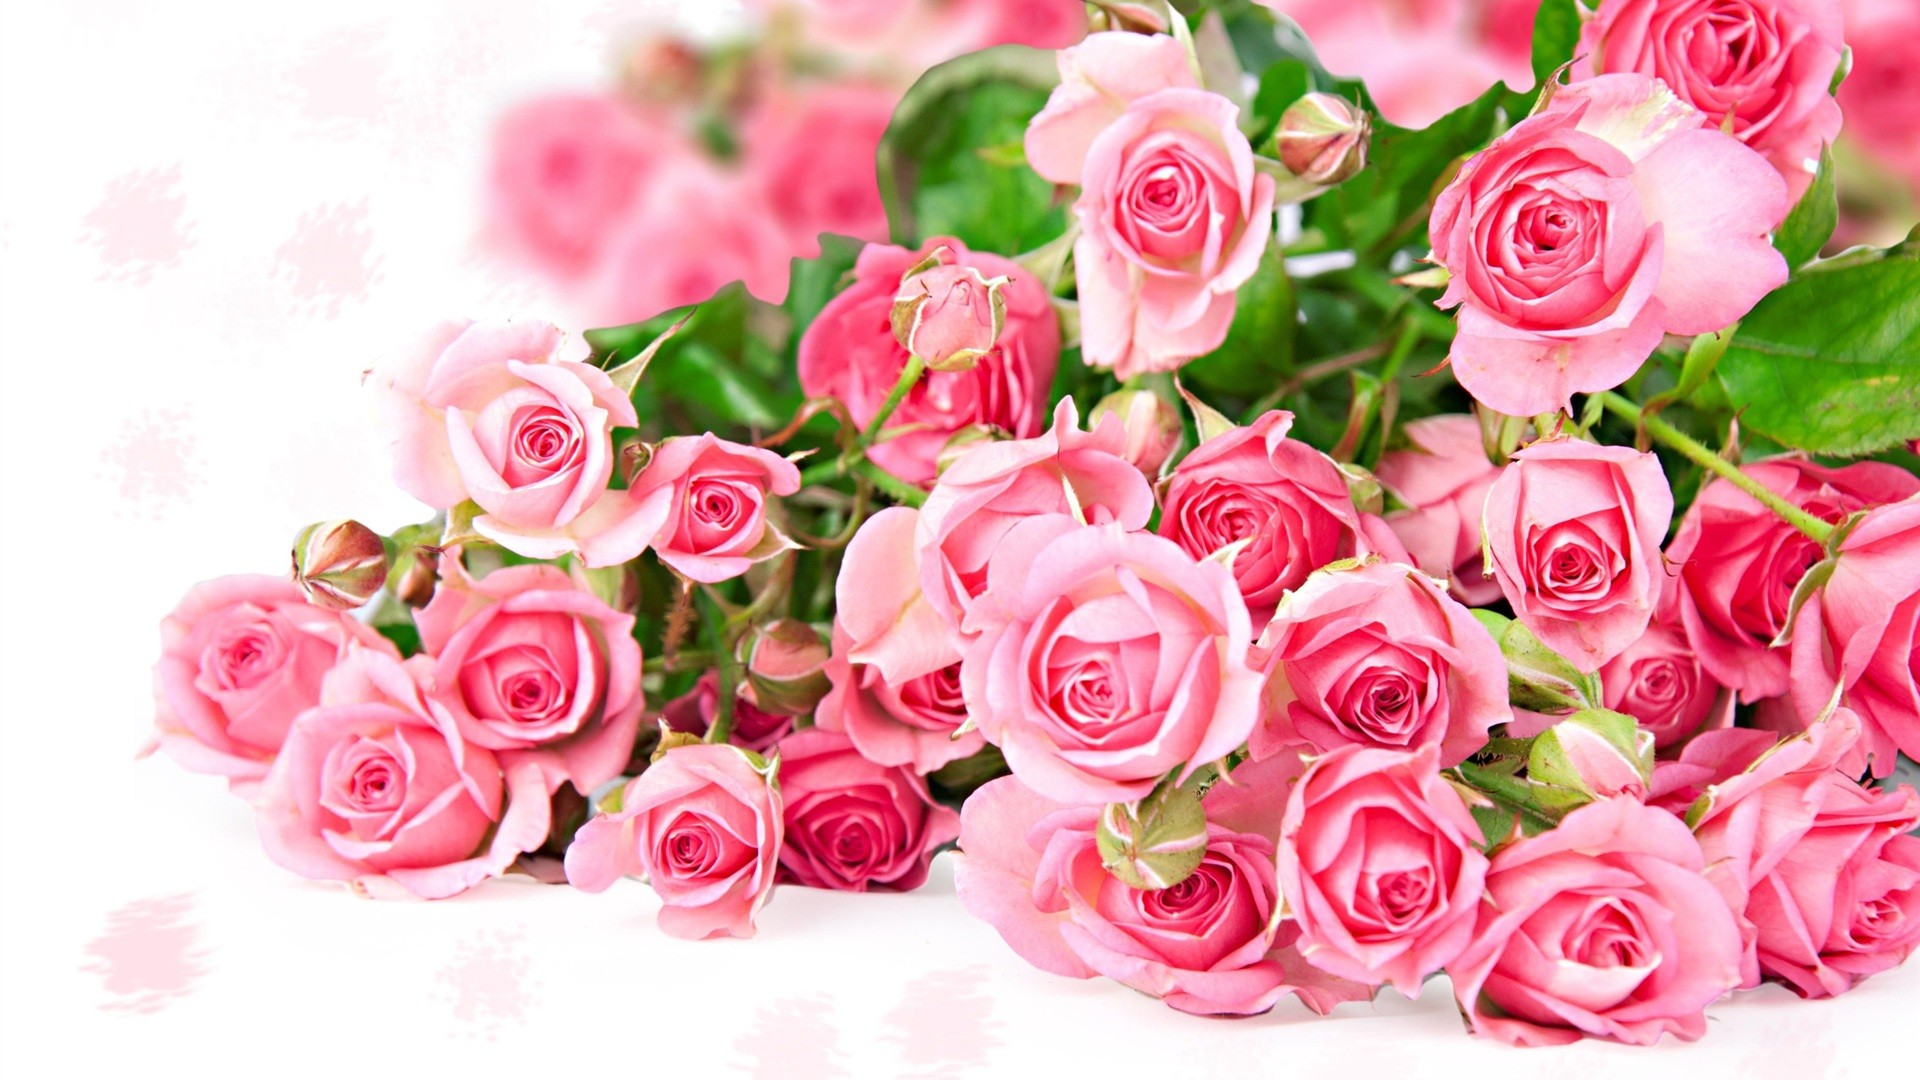 Pink roses Stock Photos Royalty Free Pink roses Images  Depositphotos